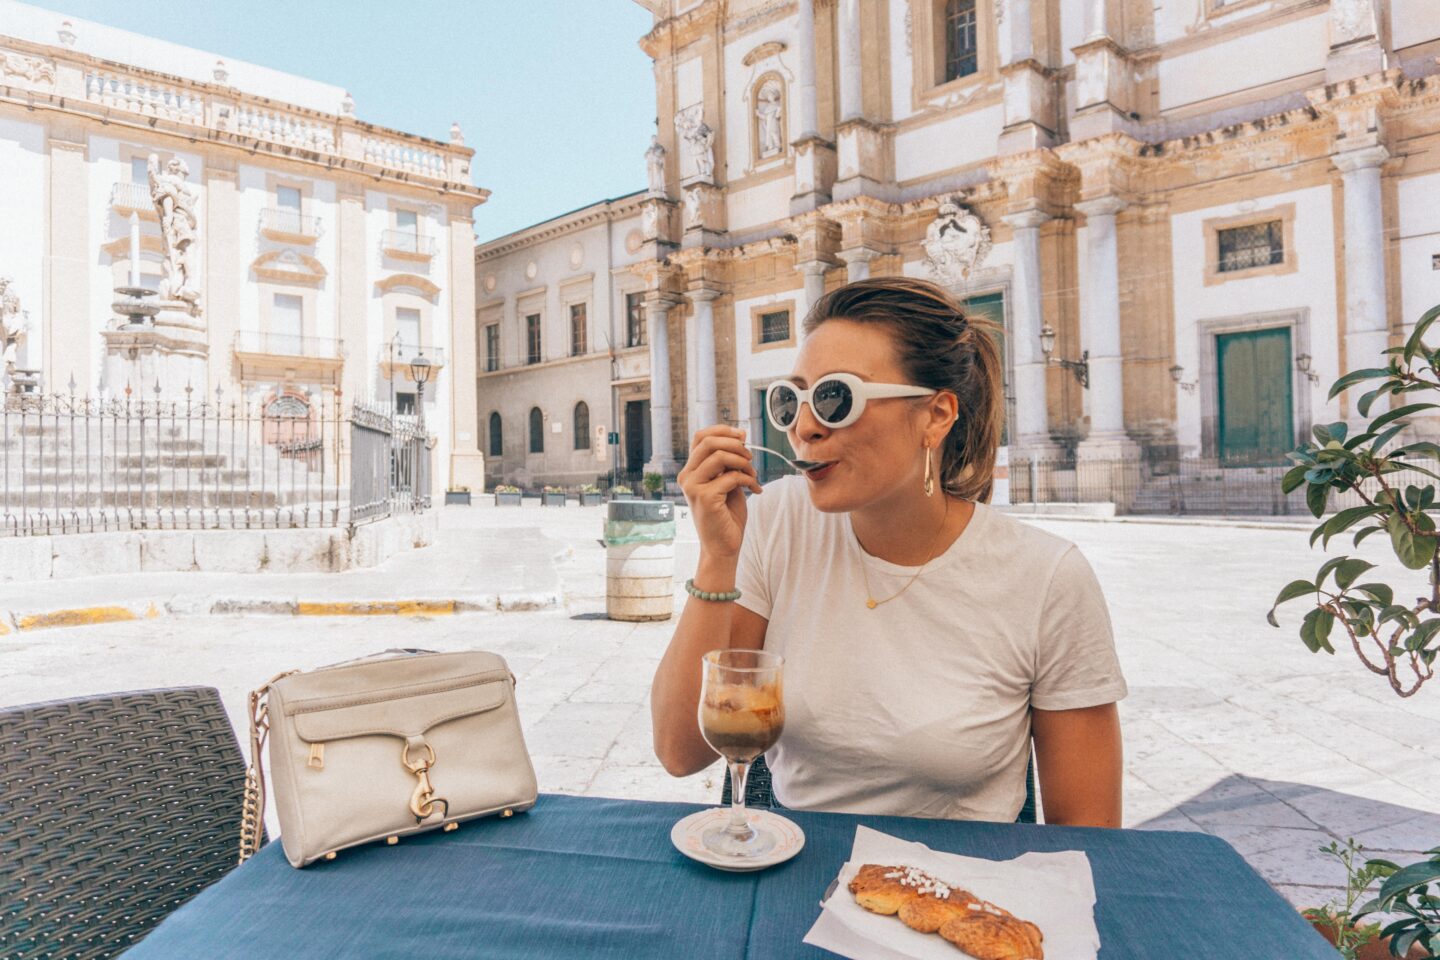 A girl wearing white sunglasses and t-shirt eats an Italian affogato coffee in a square in Palermo, Sicily